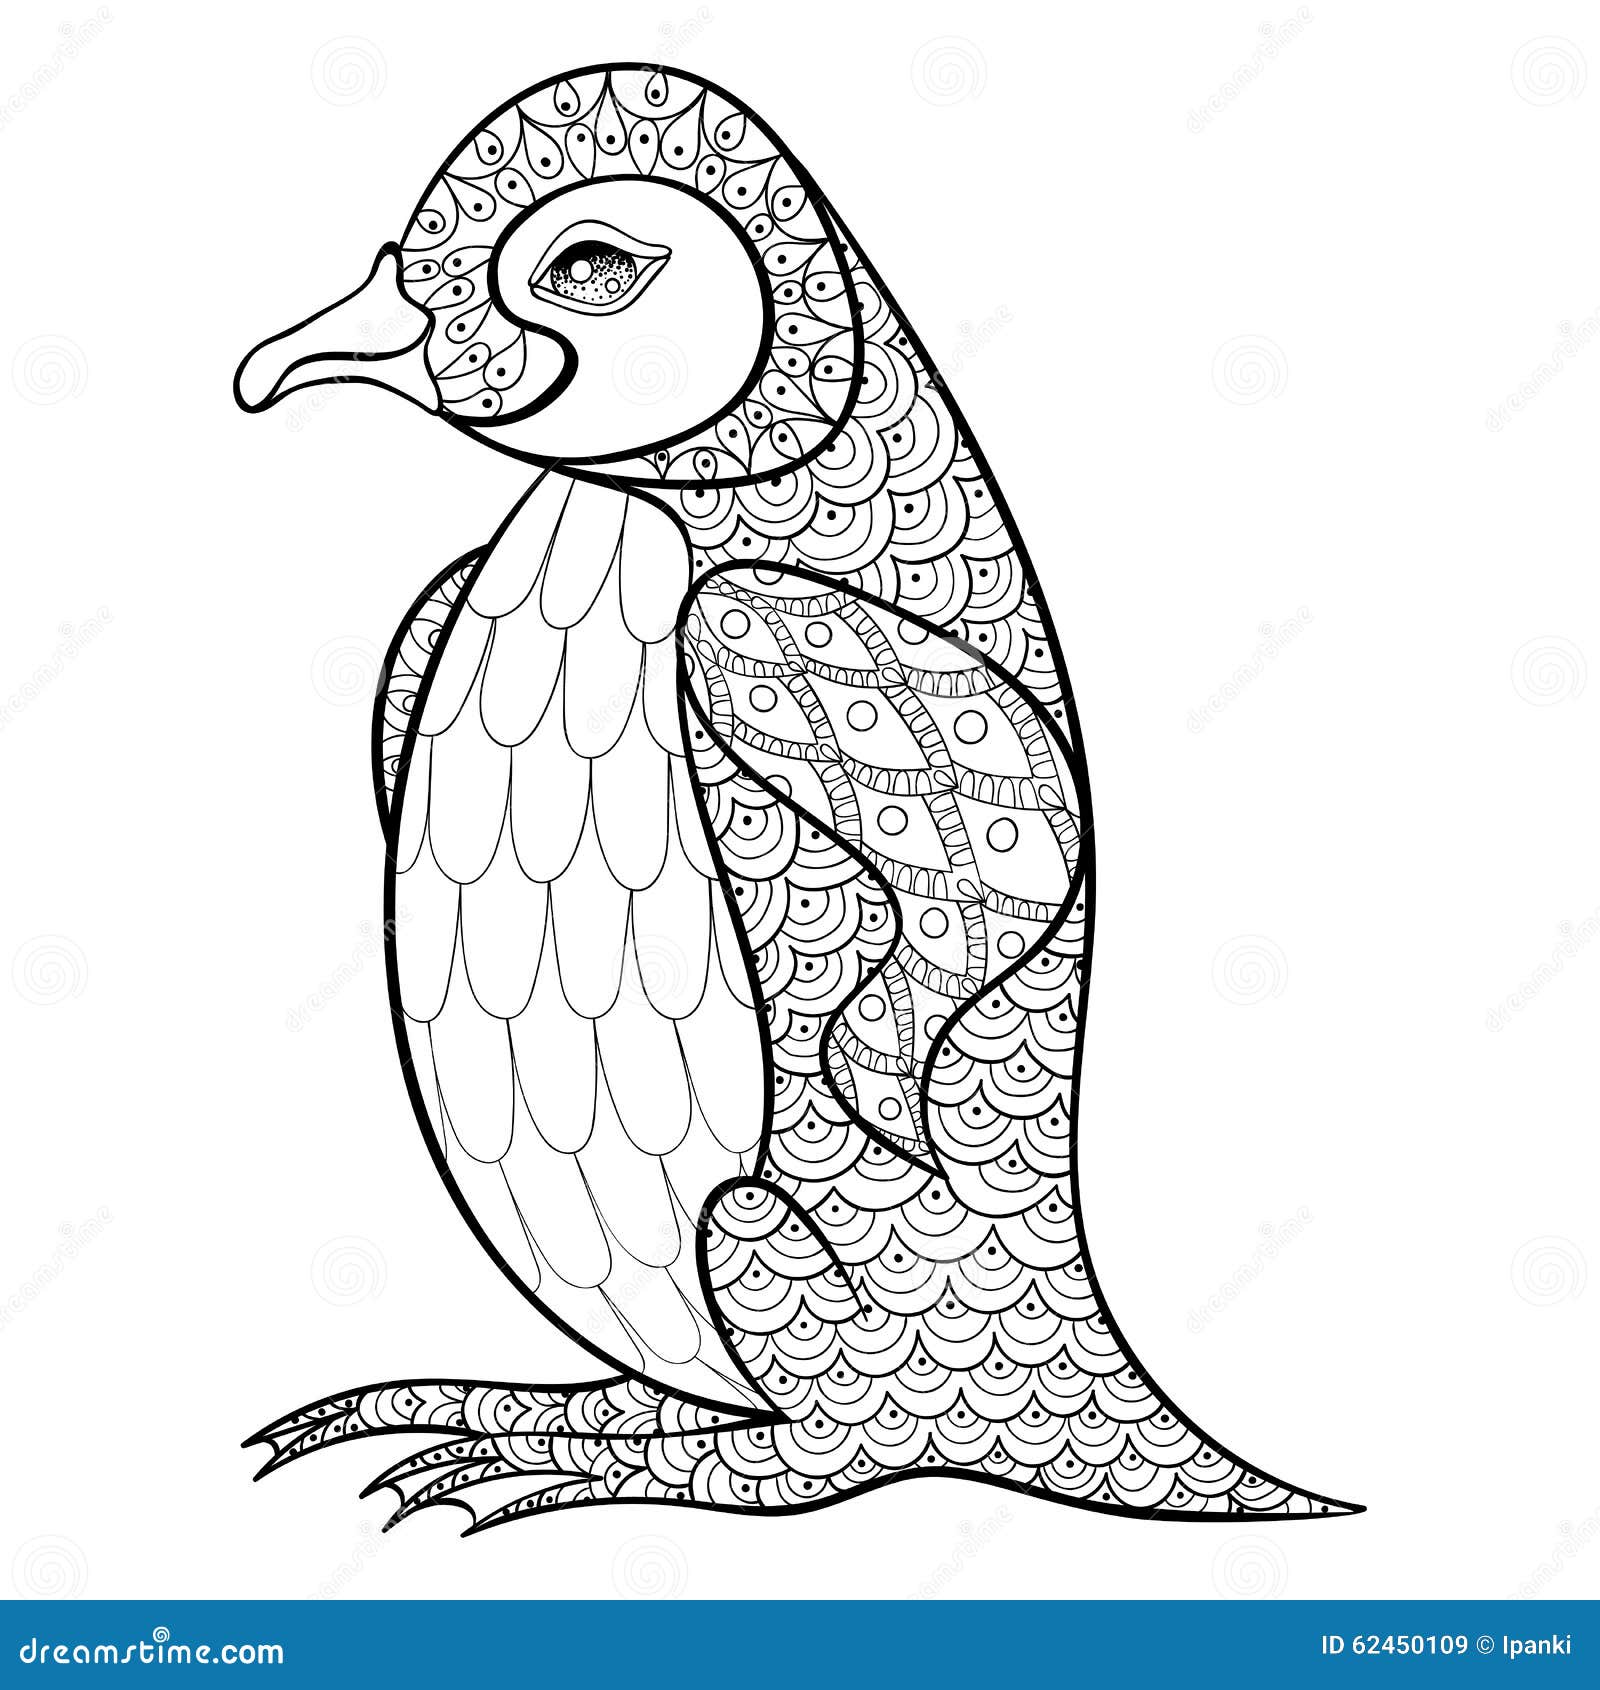 Coloring pages with King Penguin zentangle illustartion for adu